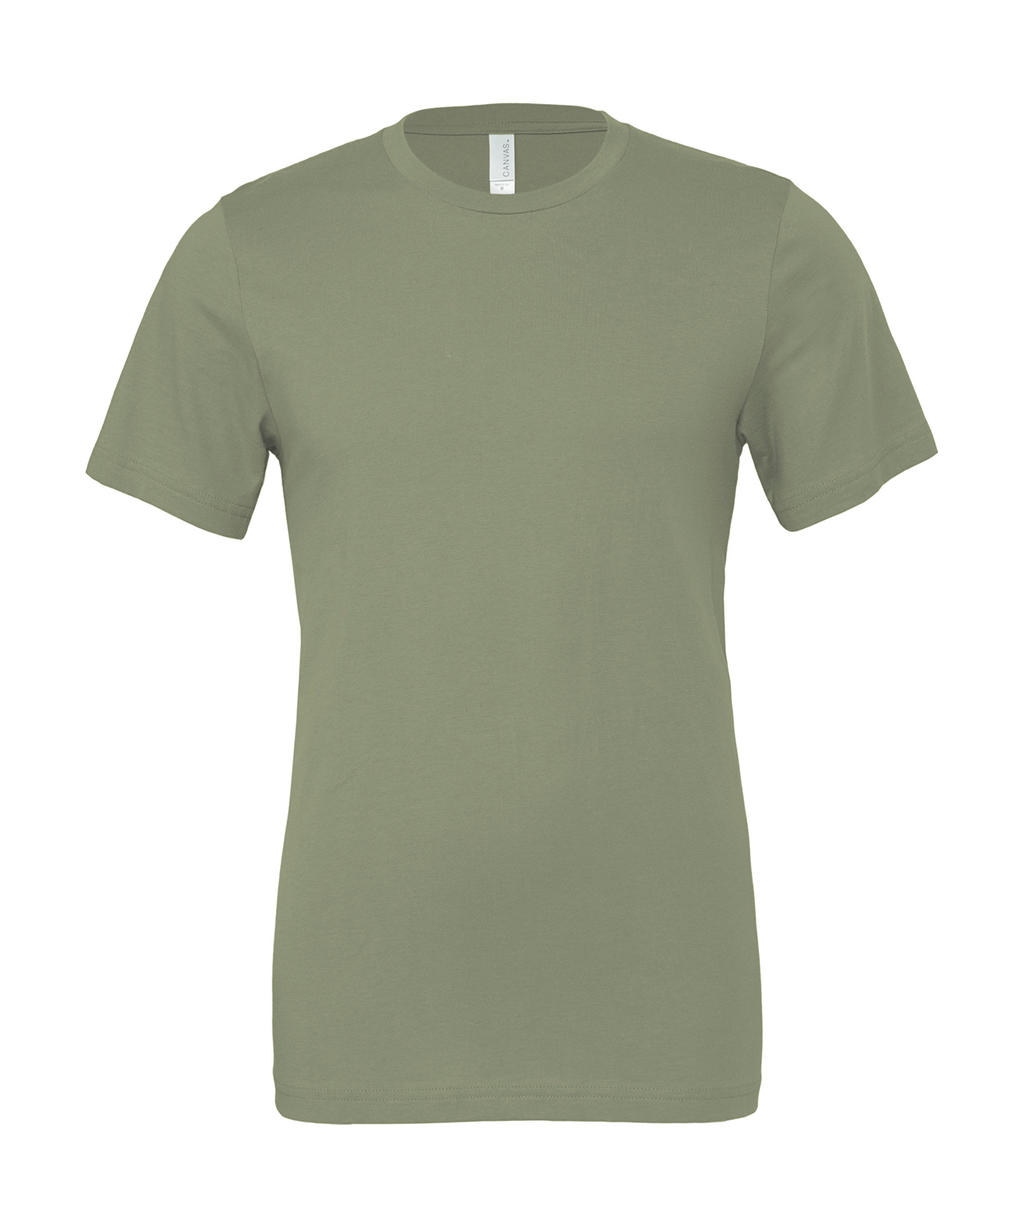  Unisex Jersey Short Sleeve Tee in Farbe Military Green